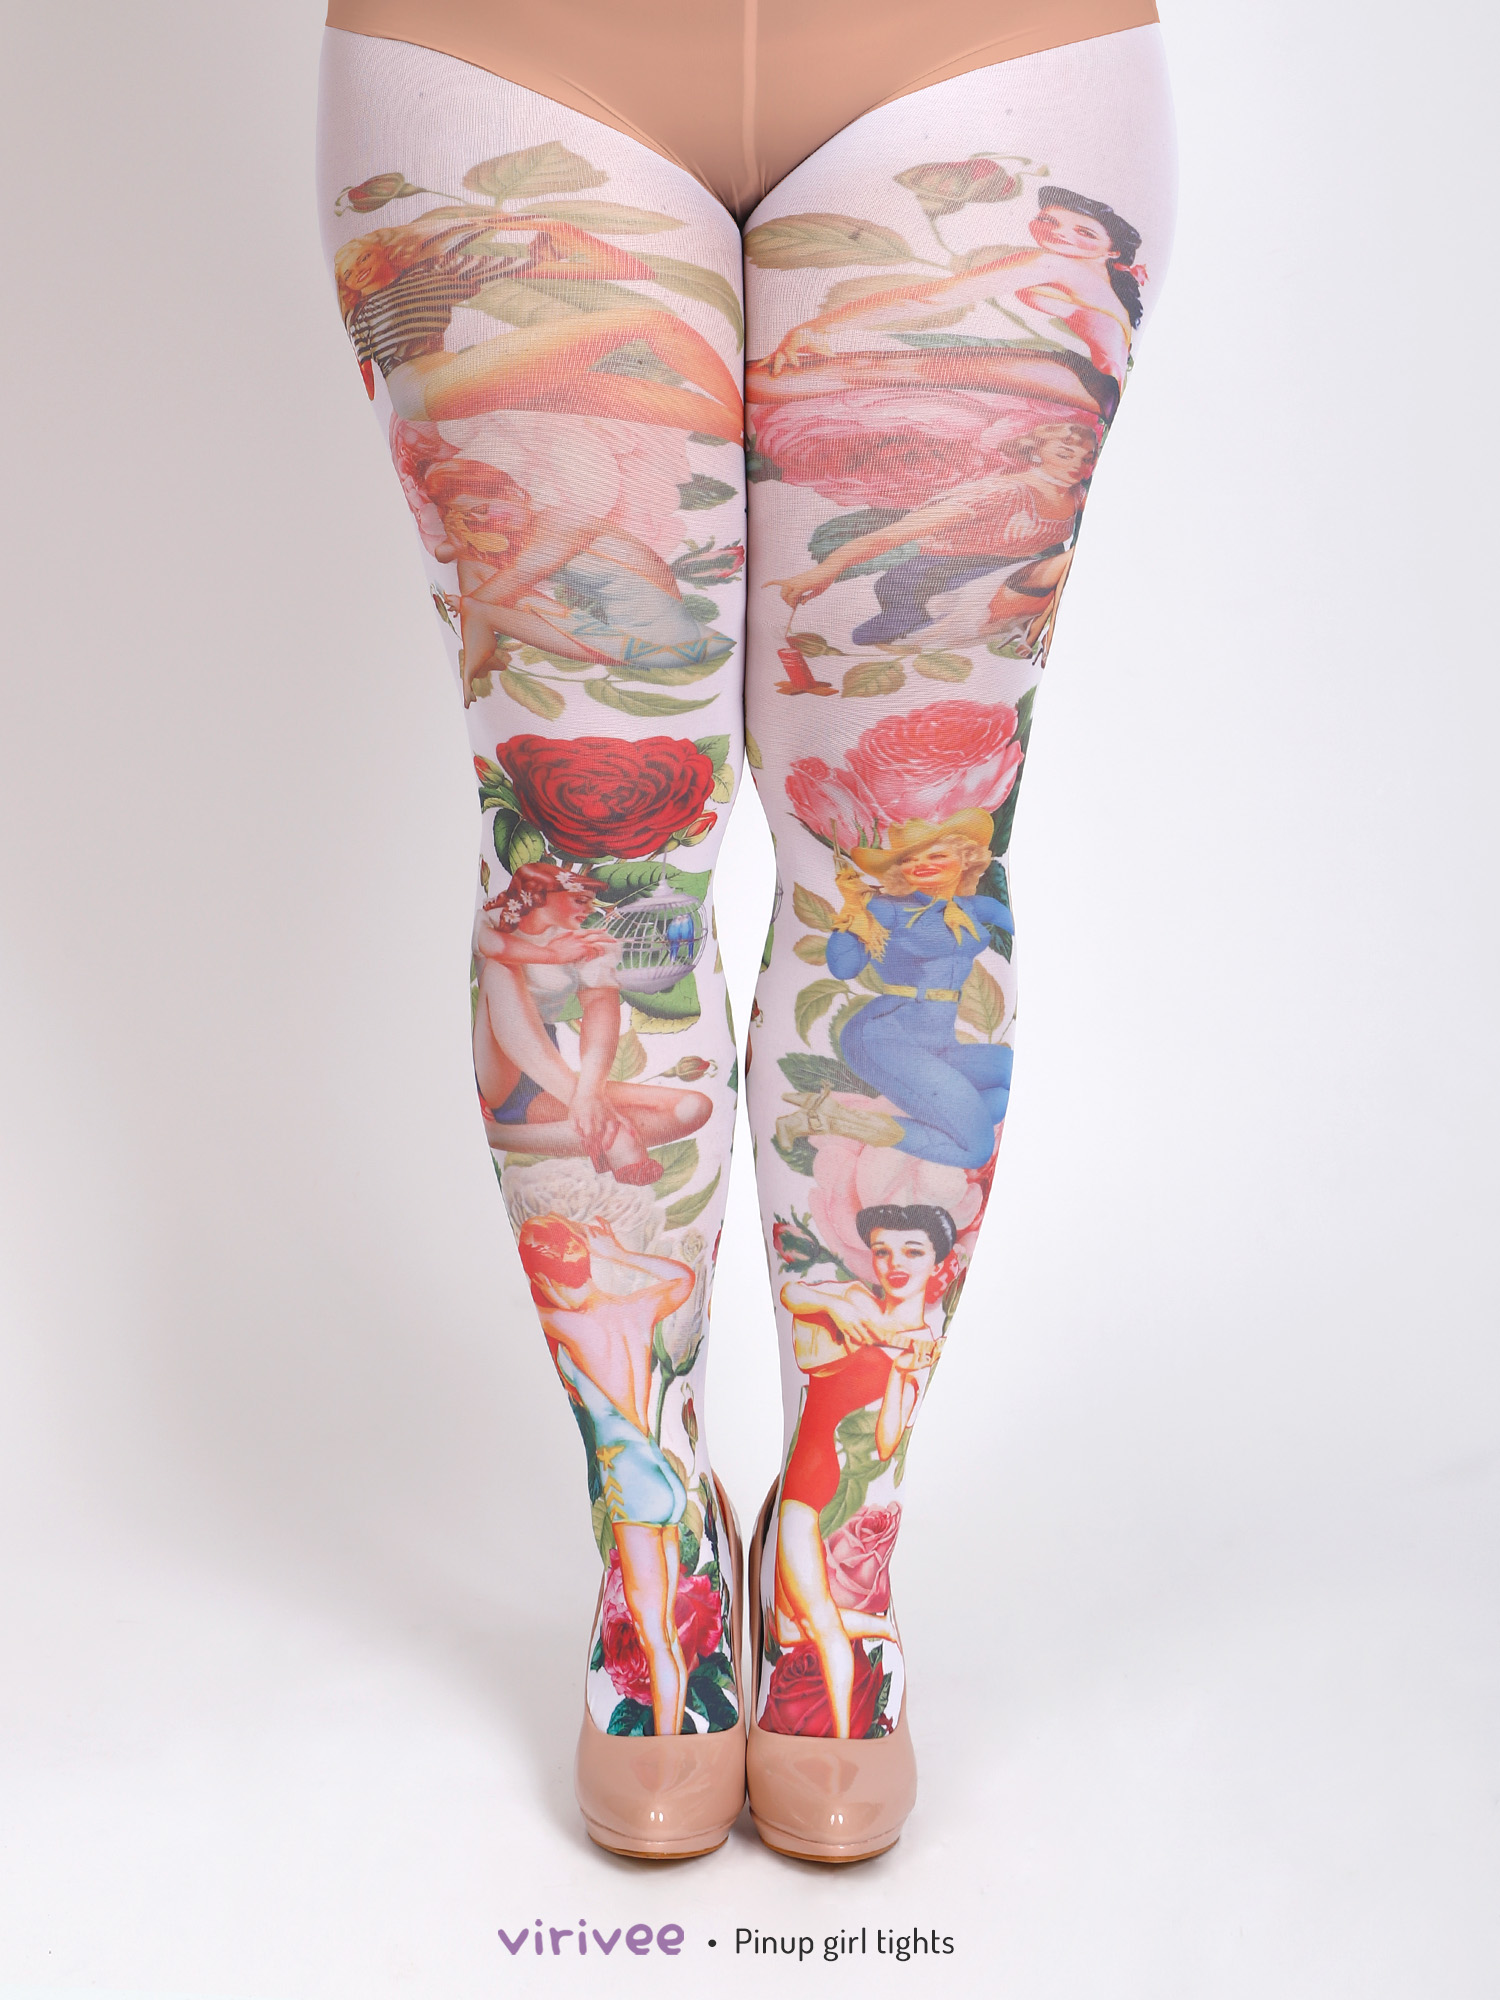 Plus size pinup girls tights